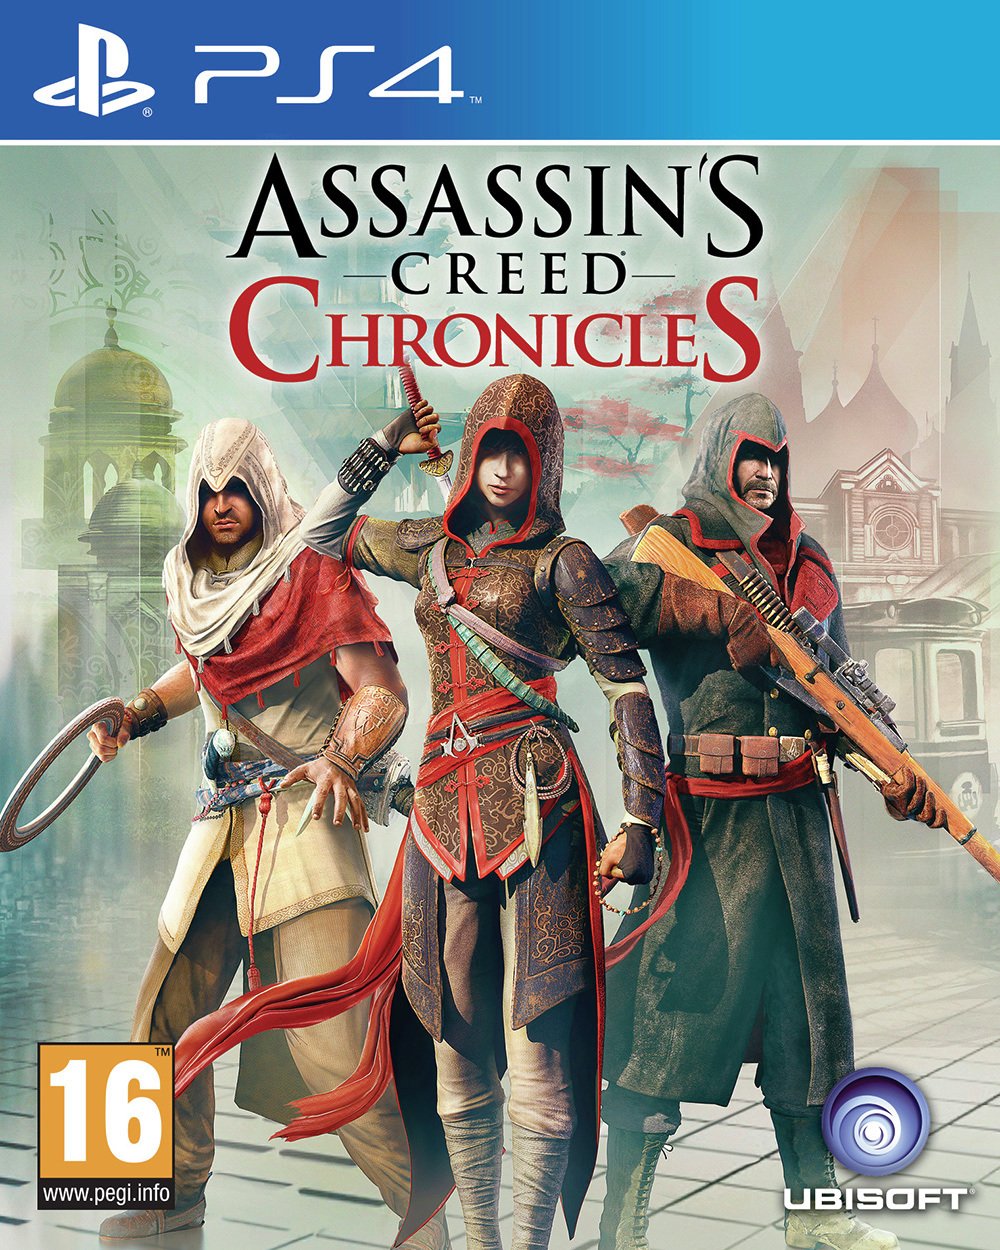 Assassin's Creed: Chronicles PS4 Game.